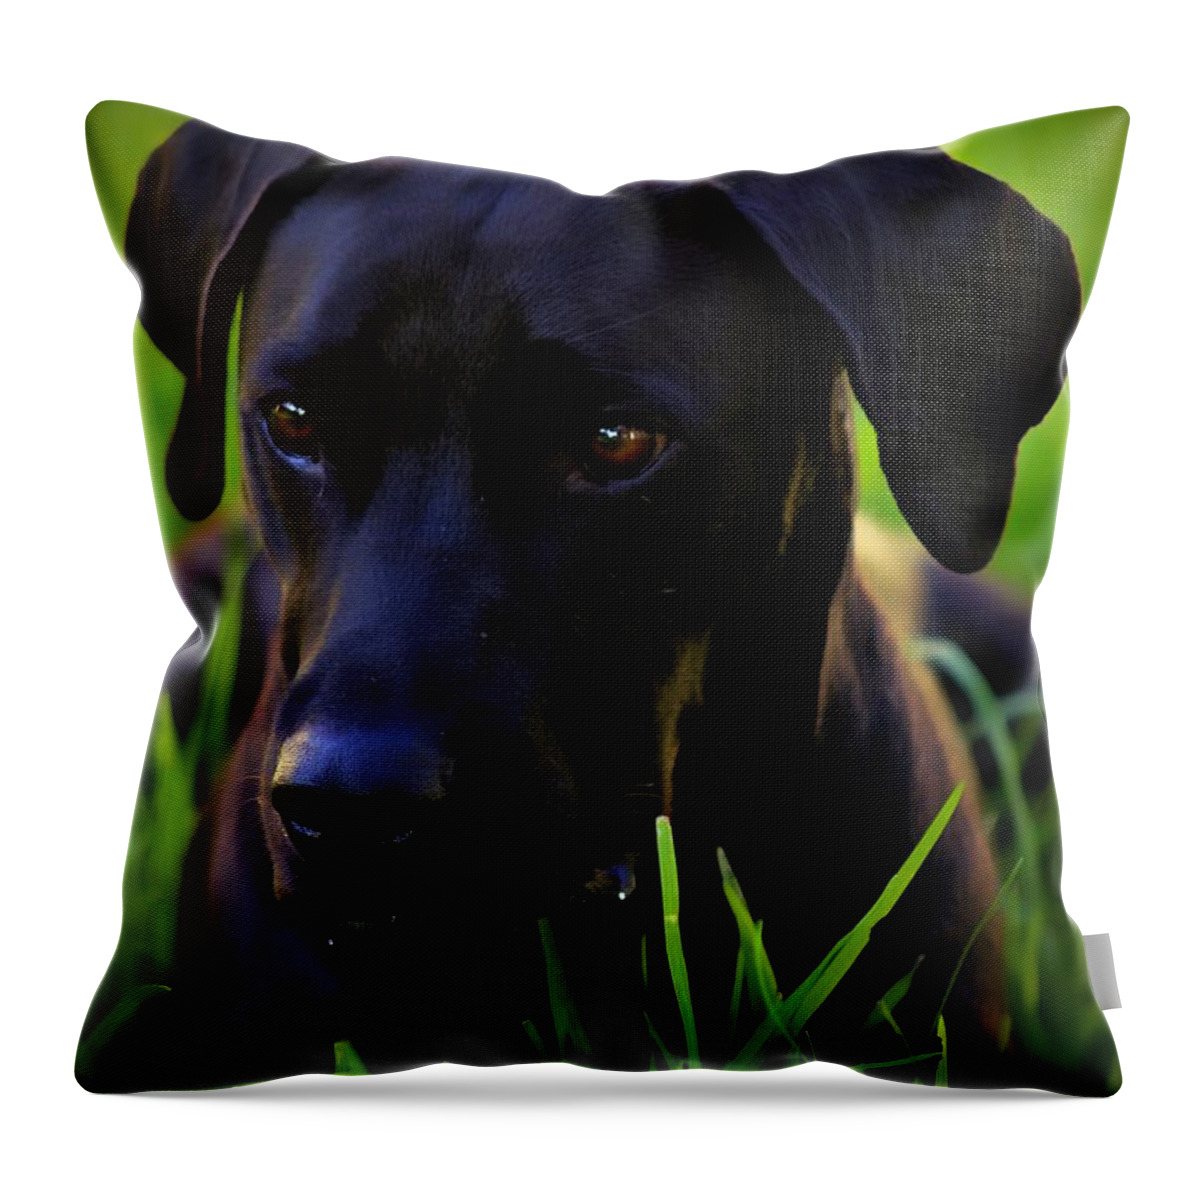 Black Dog Throw Pillow featuring the photograph Black Velvet by Clare Bevan